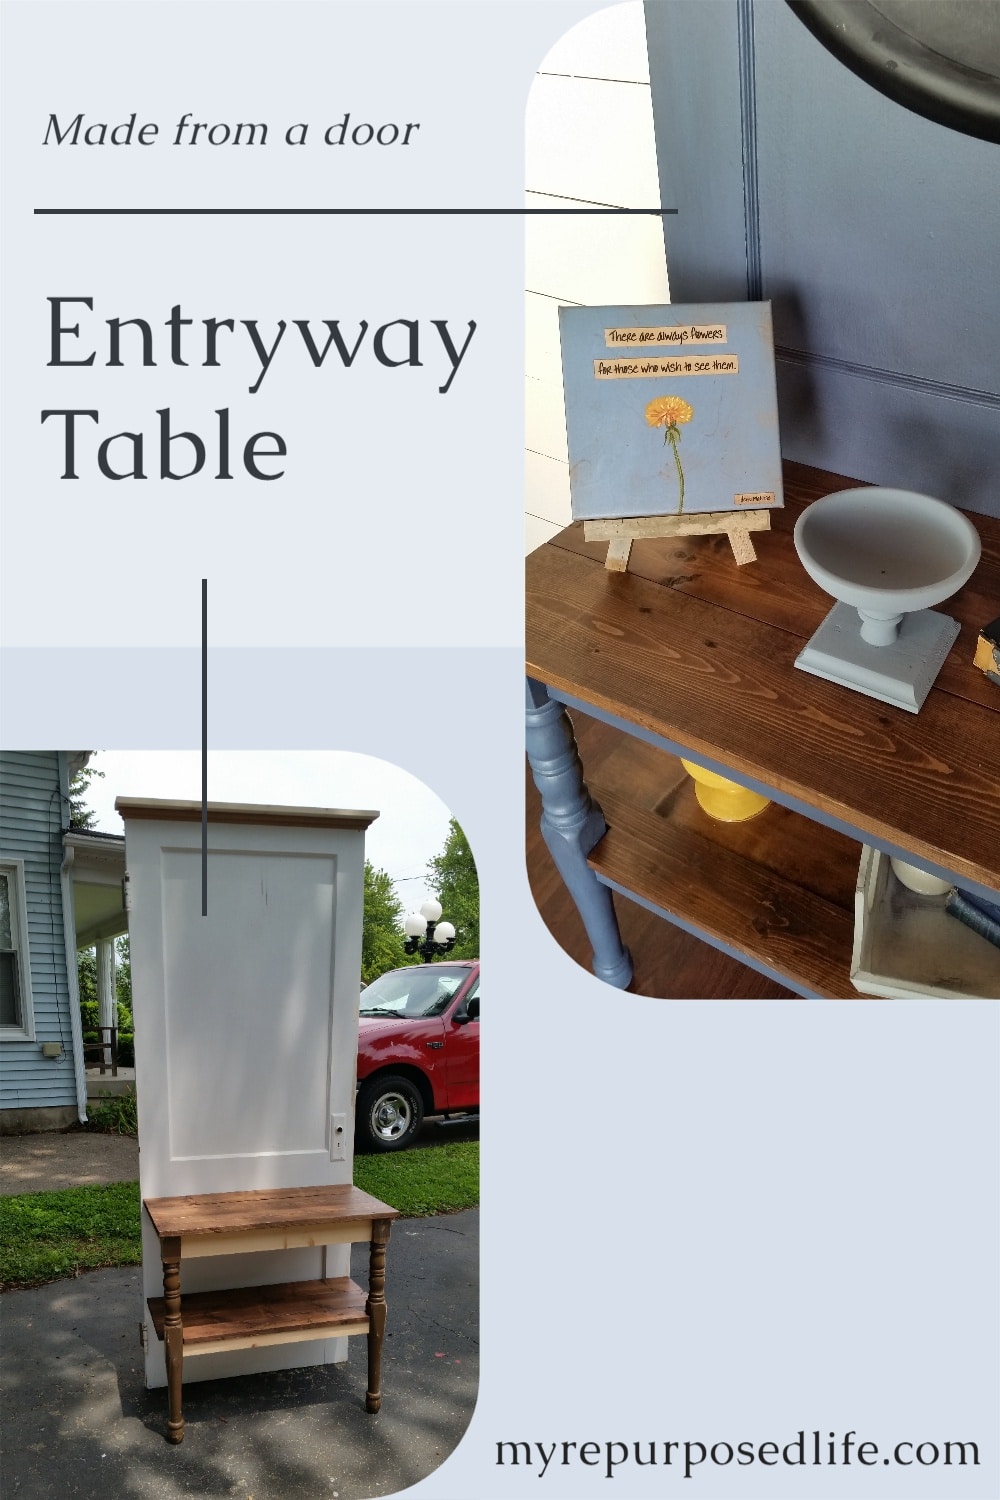 Making a DIY Entry Table out of an old door and table legs is a great weekend project. Entry way tables are very functional and pretty for your home decor. #MyRepurposedLife #repurposed #entrytable #door #table via @repurposedlife